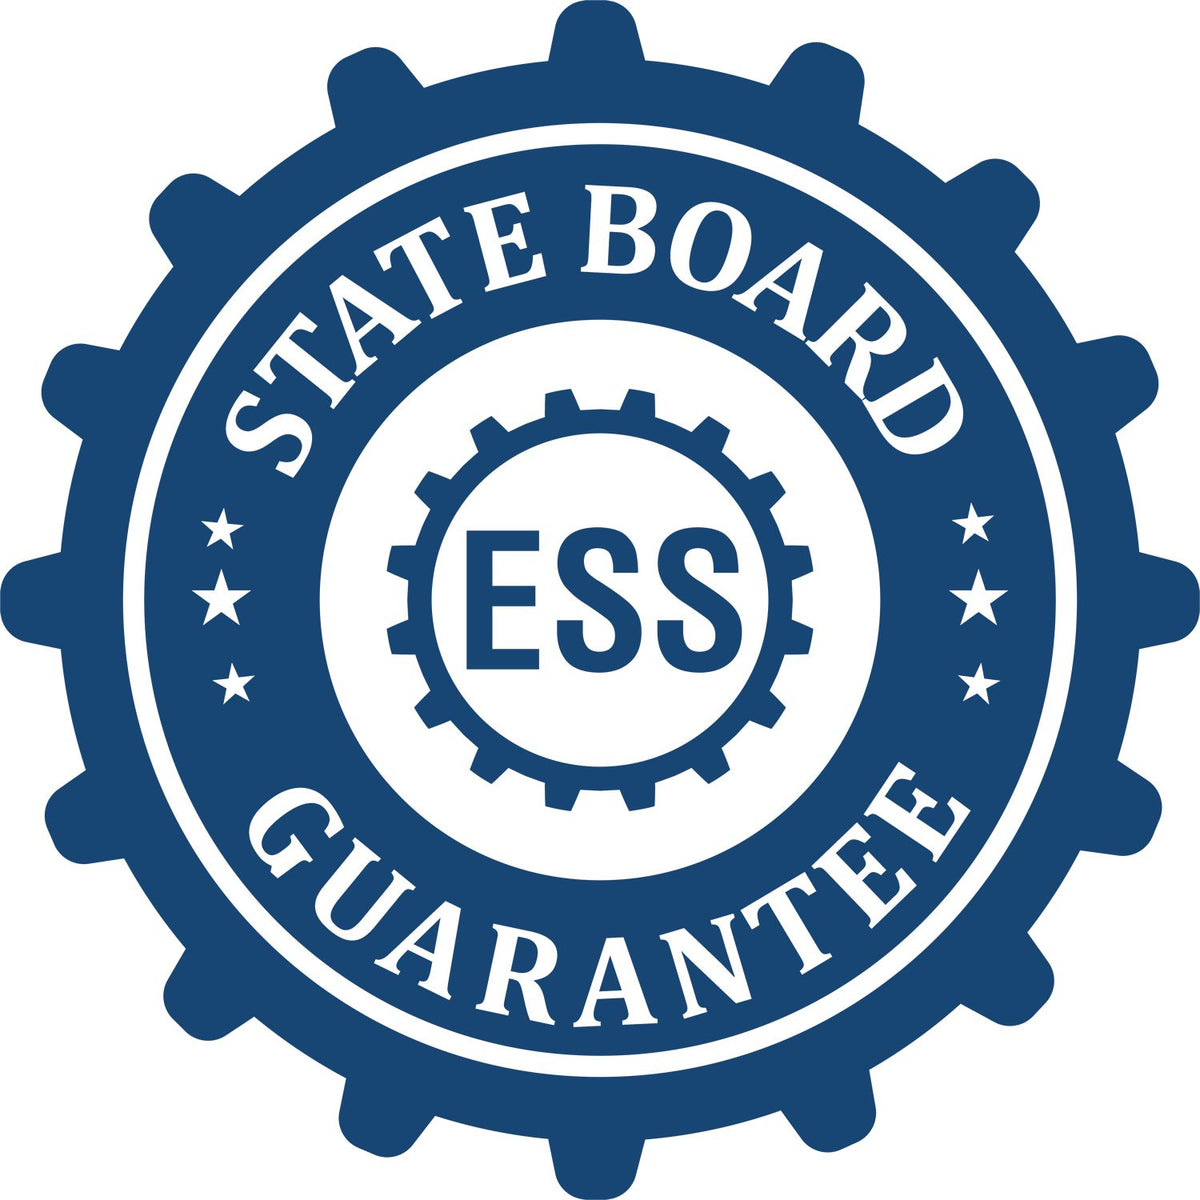 An emblem in a gear shape illustrating a state board guarantee for the Handheld Guam Land Surveyor Seal product.